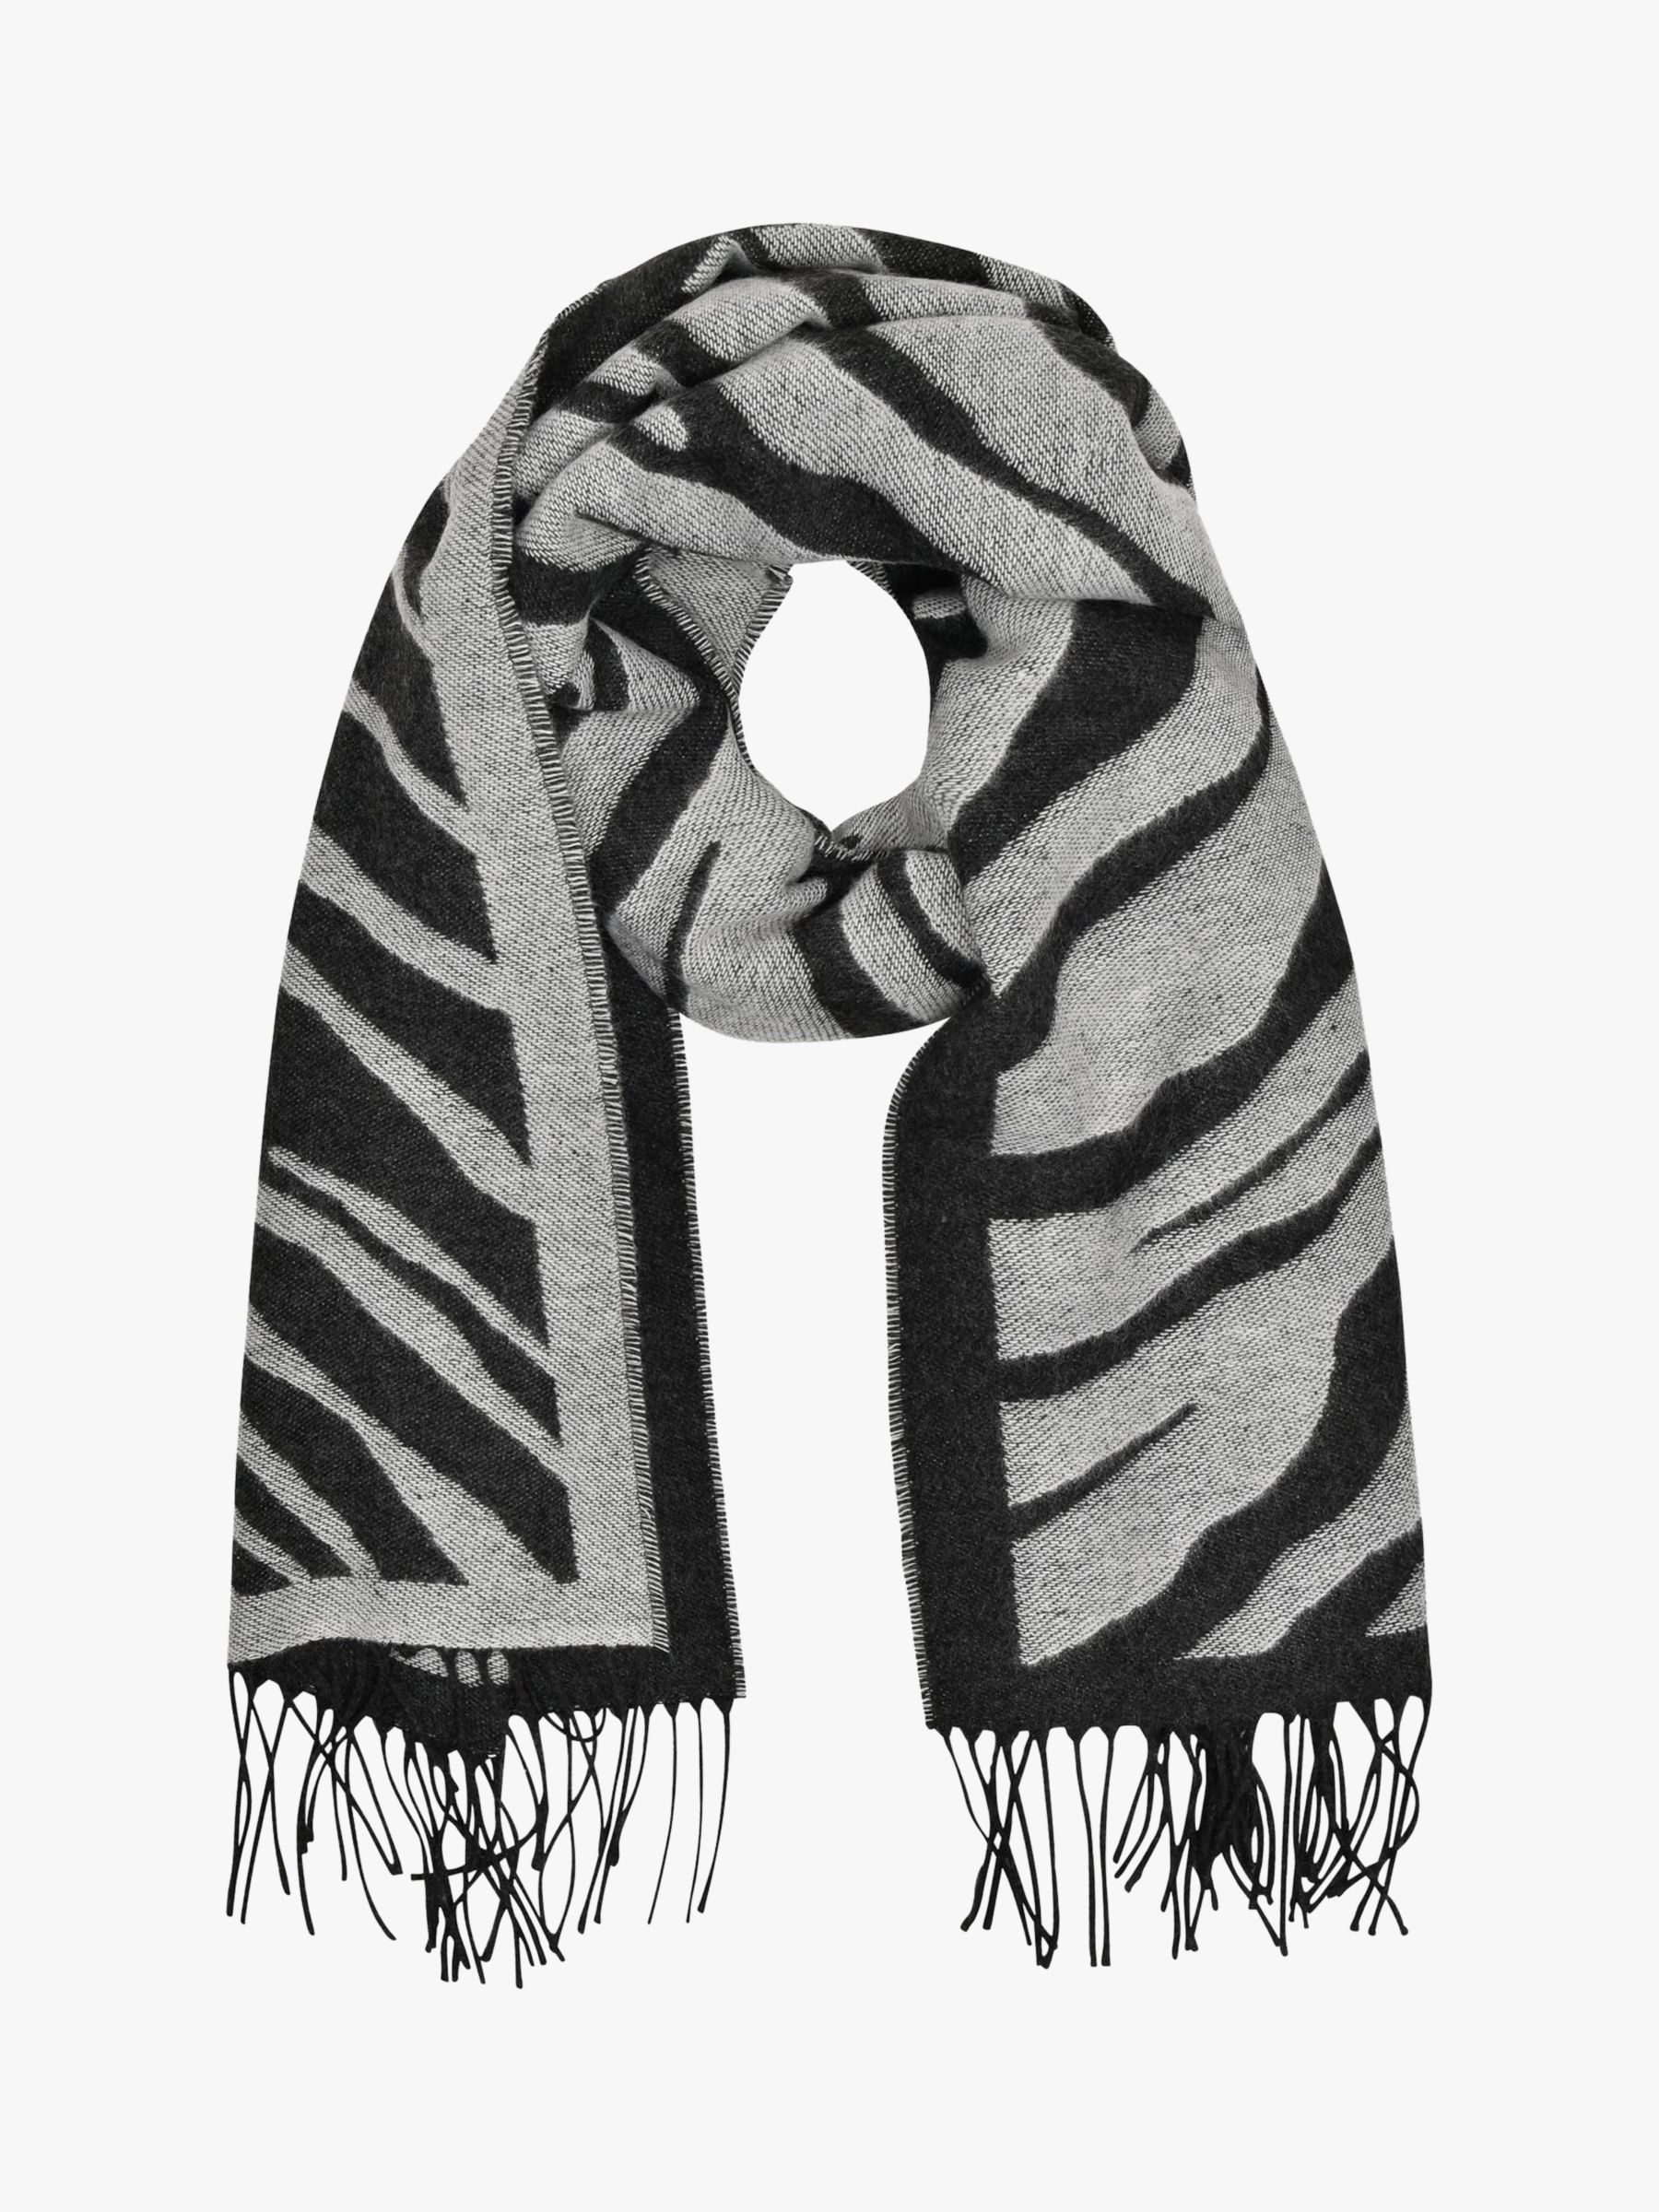 French Connection Tiger Jacquard Scarf, Dark Grey/Winter White, One Size